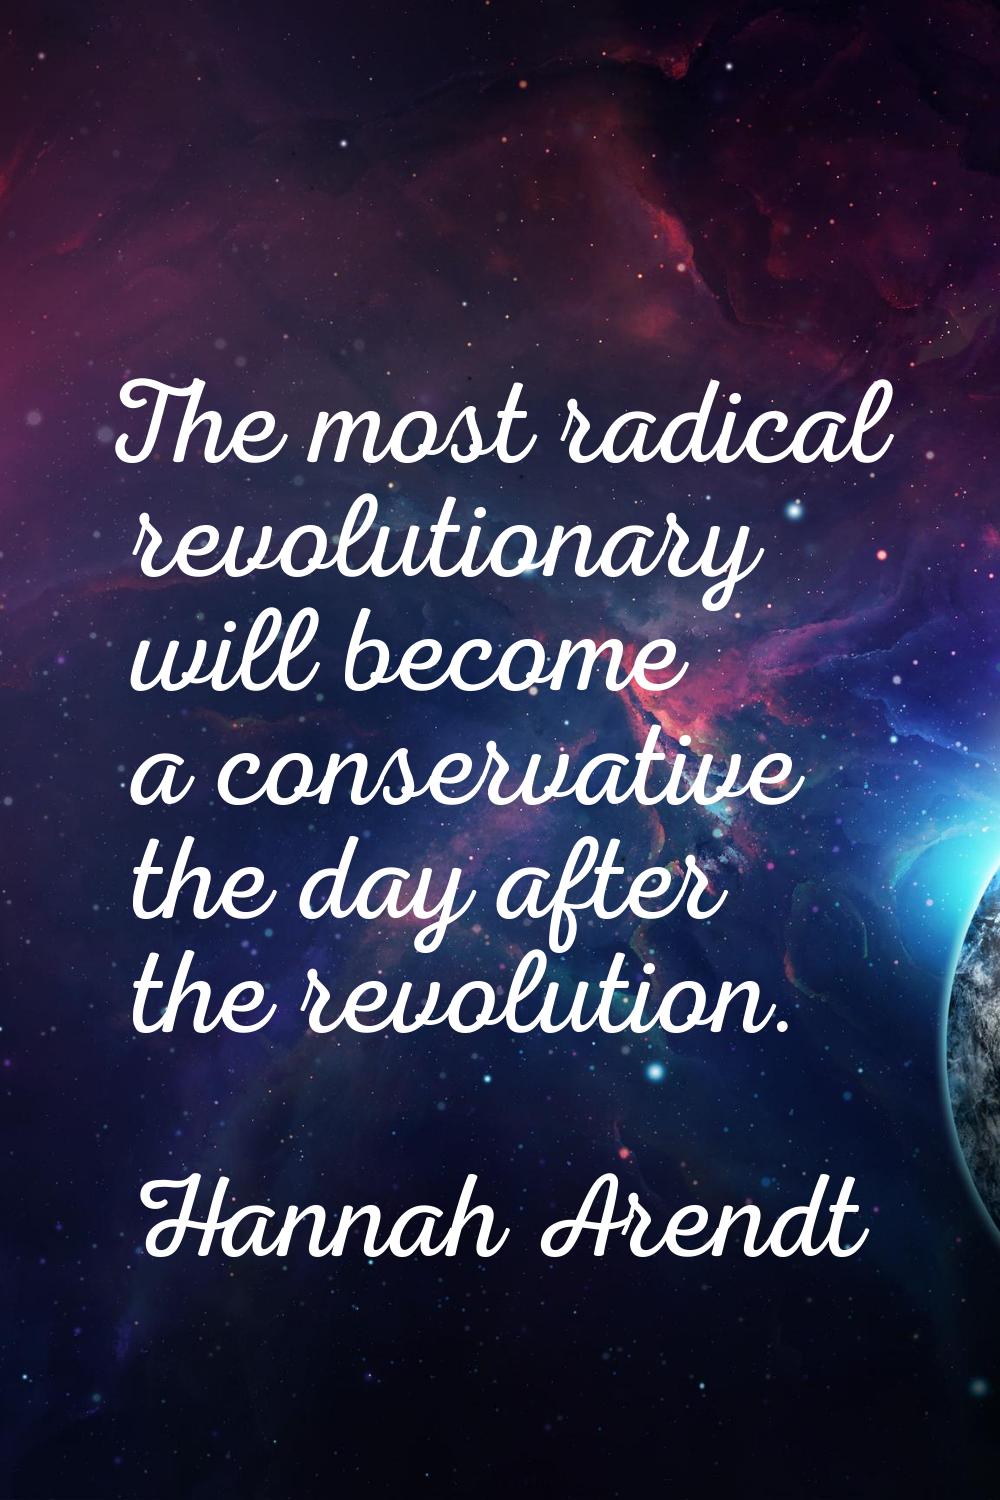 The most radical revolutionary will become a conservative the day after the revolution.